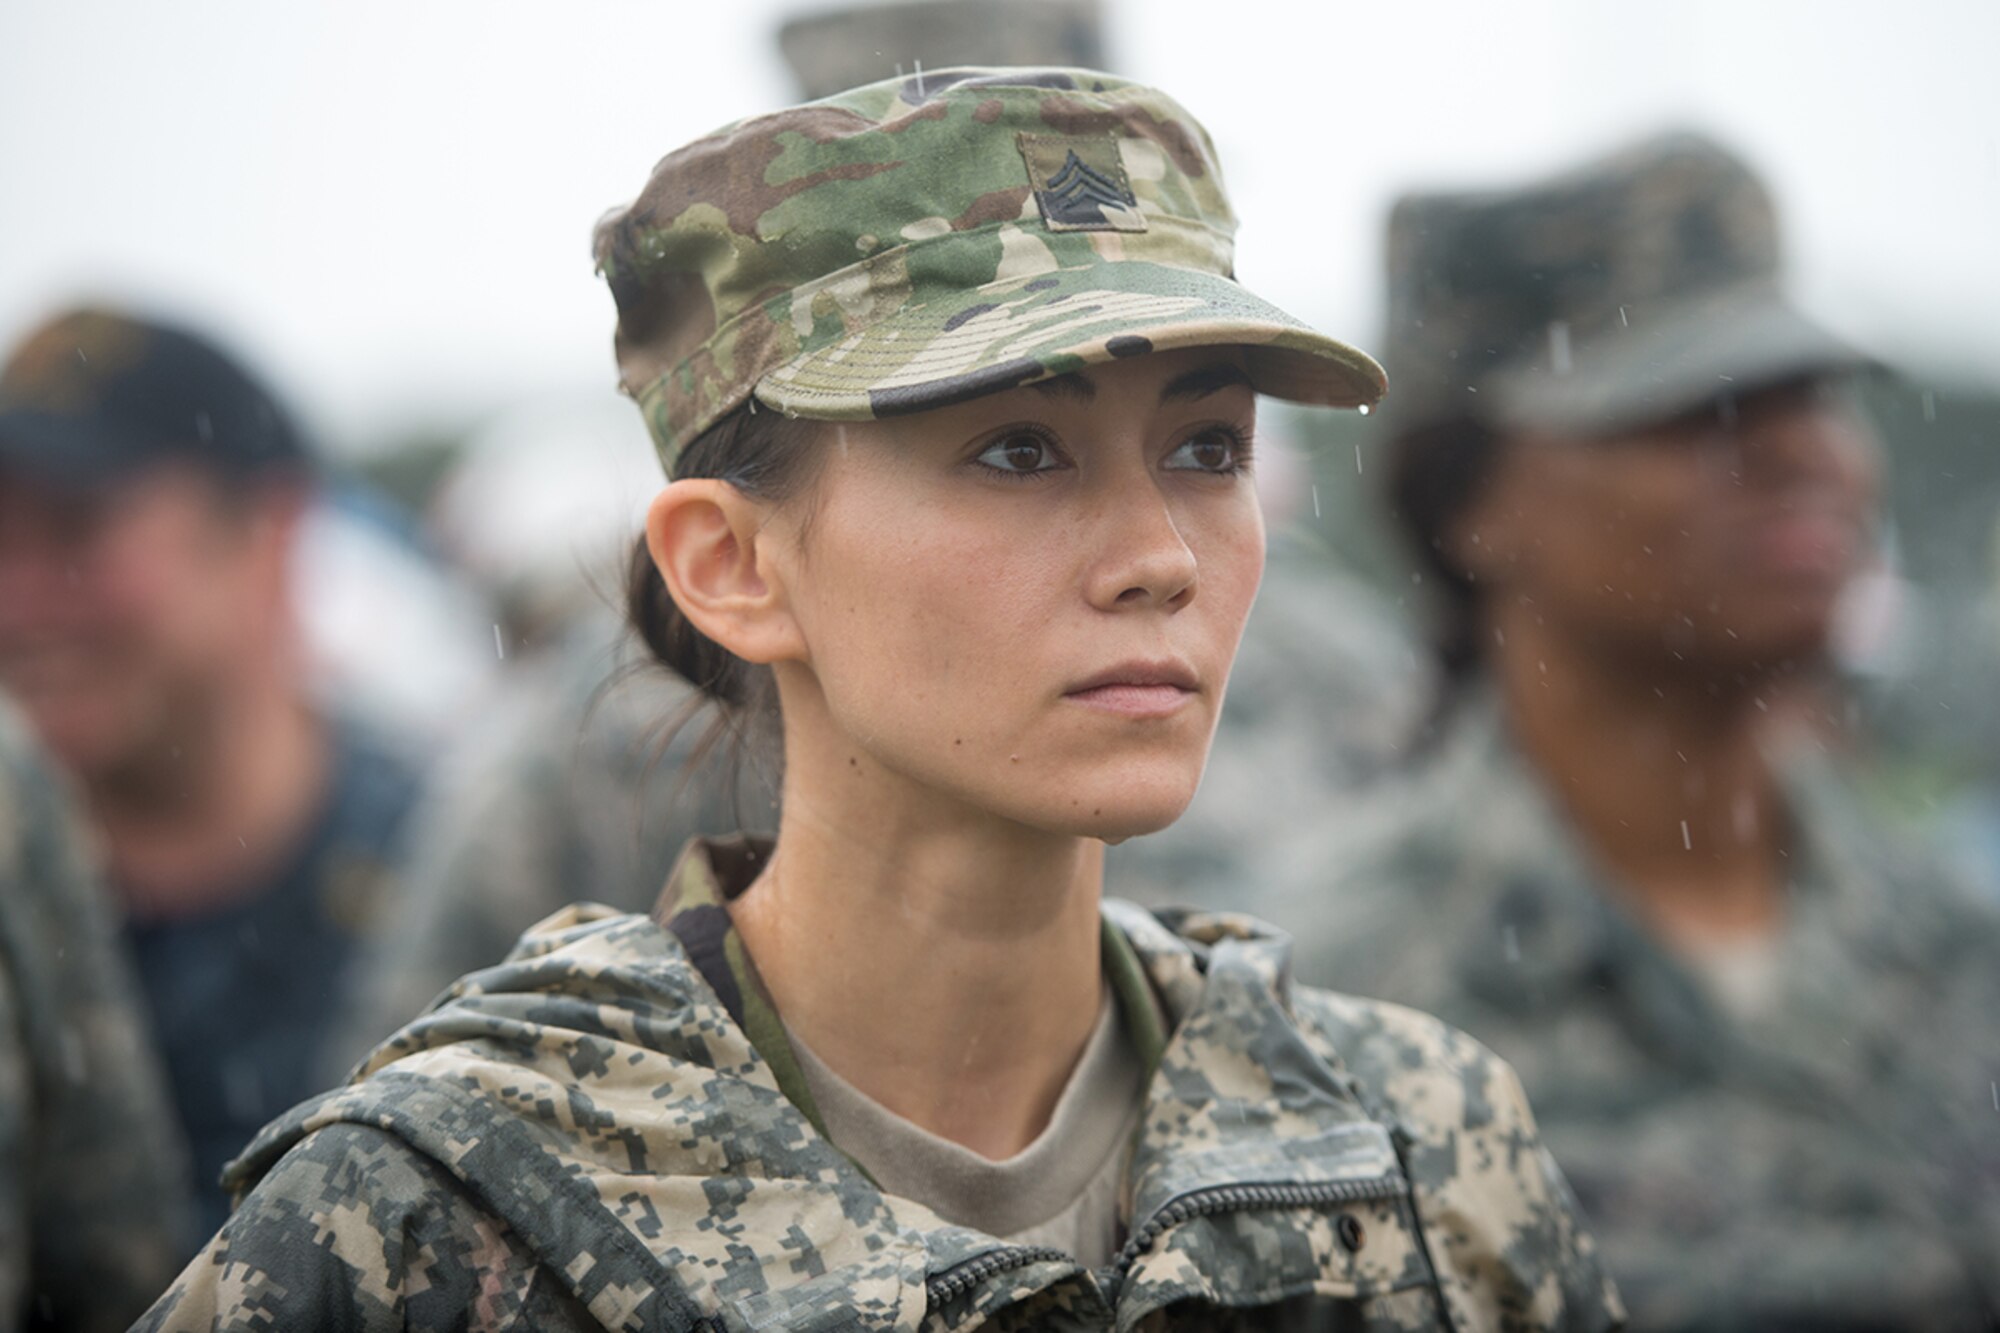 Army Sgt. Marlise Muenzer, 94th Combat Support Hospital medic, takes part in the closing ceremony of the Kanagawa Prefecture Government Joint Disaster Drill at Japan Ground Self-Defense Force Camp Takeyama, Japan, Sept. 11, 2016. The exercise provided an opportunity for U.S. Armed Force members to strengthen partnerships with the Japan Self-Defense Force. (U.S. Air Force photo by Senior Airman Delano Scott/Released)